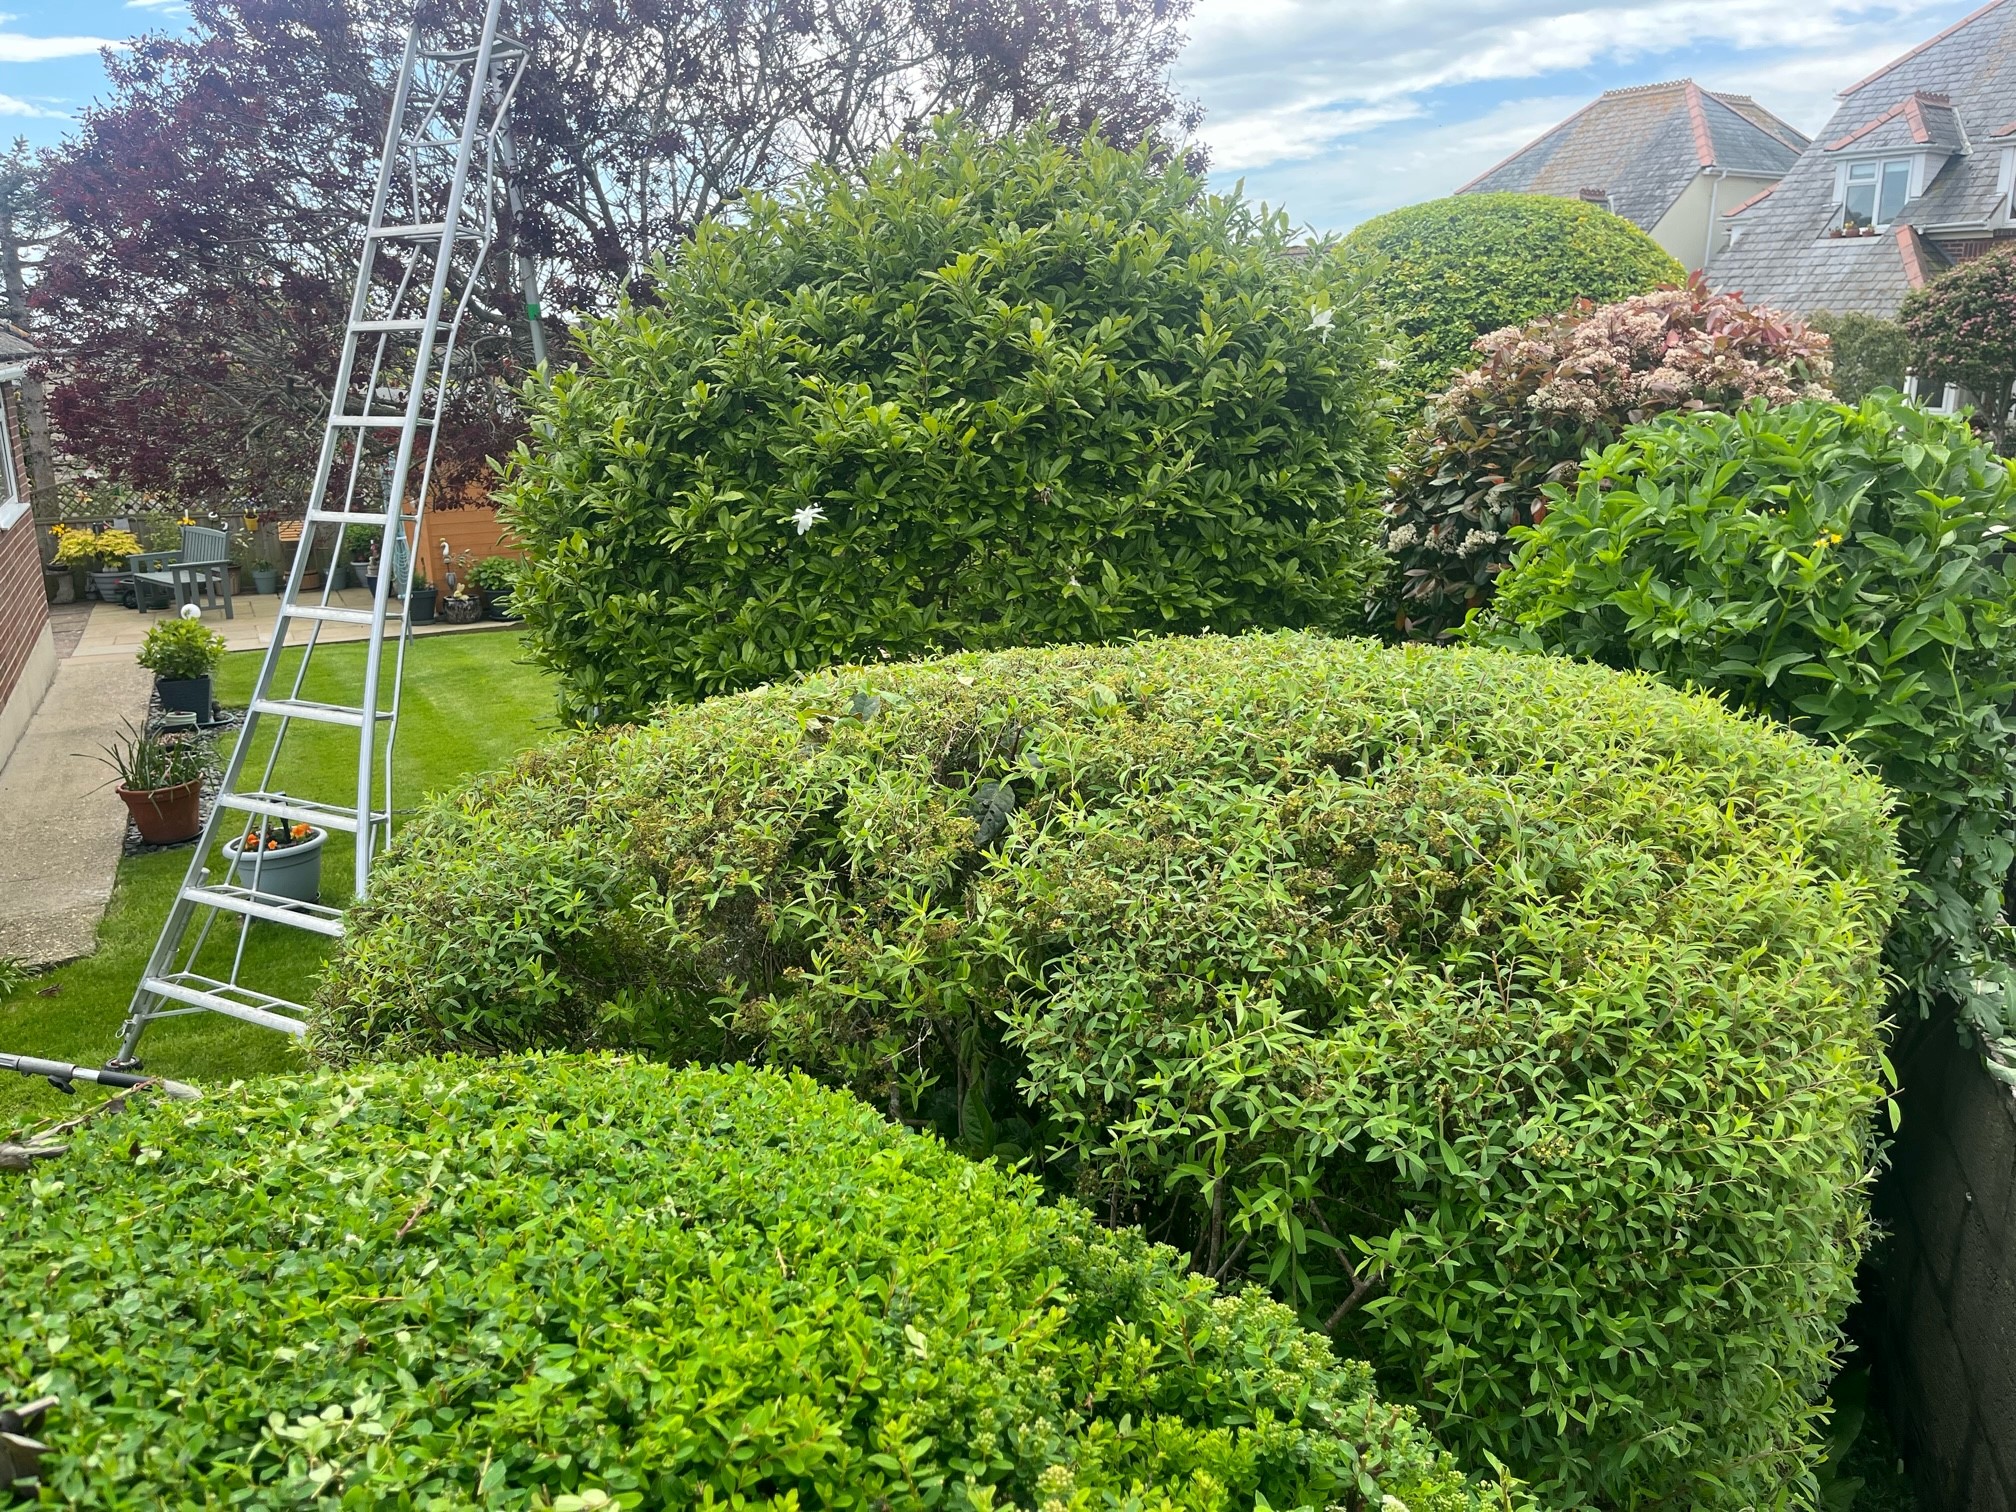 Weymouth tree surgeon - Garden maintenance and clearance services in Weymouth, Dorchester, Portland, Dorset - Garden photo of hedges, shrubs that has just been pruned, cut and trimmed to tidy with a pruning ladder.